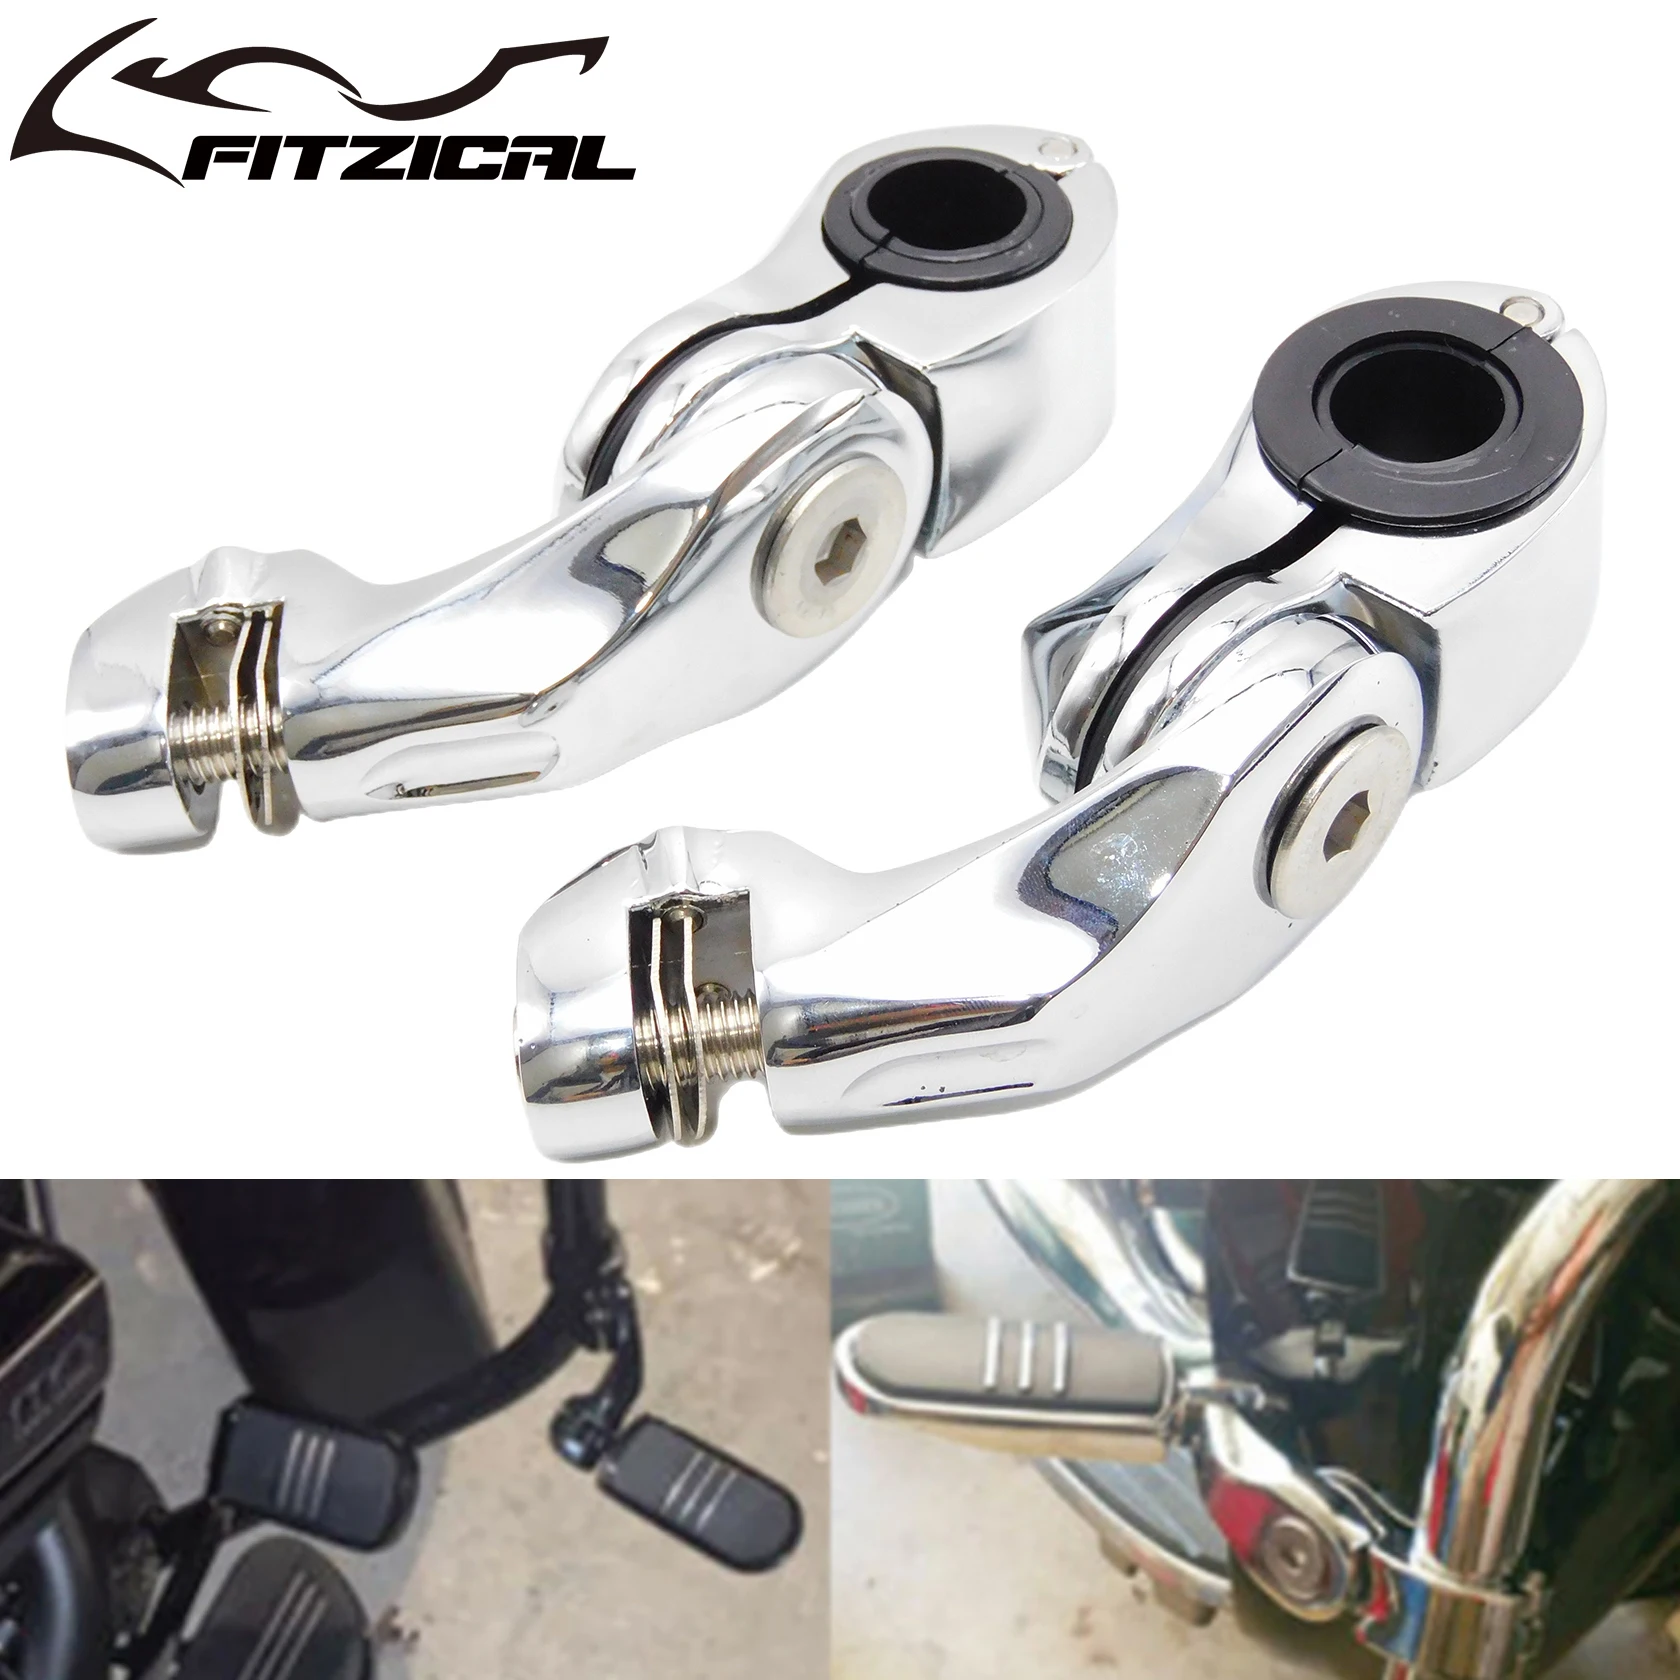 

Motorcycle 32mm 1-1/4" Highway Crash Bar Pegs Short Footpegs Clamps Engine Guard Mount For Harley Sportster Touring Dyna Softail